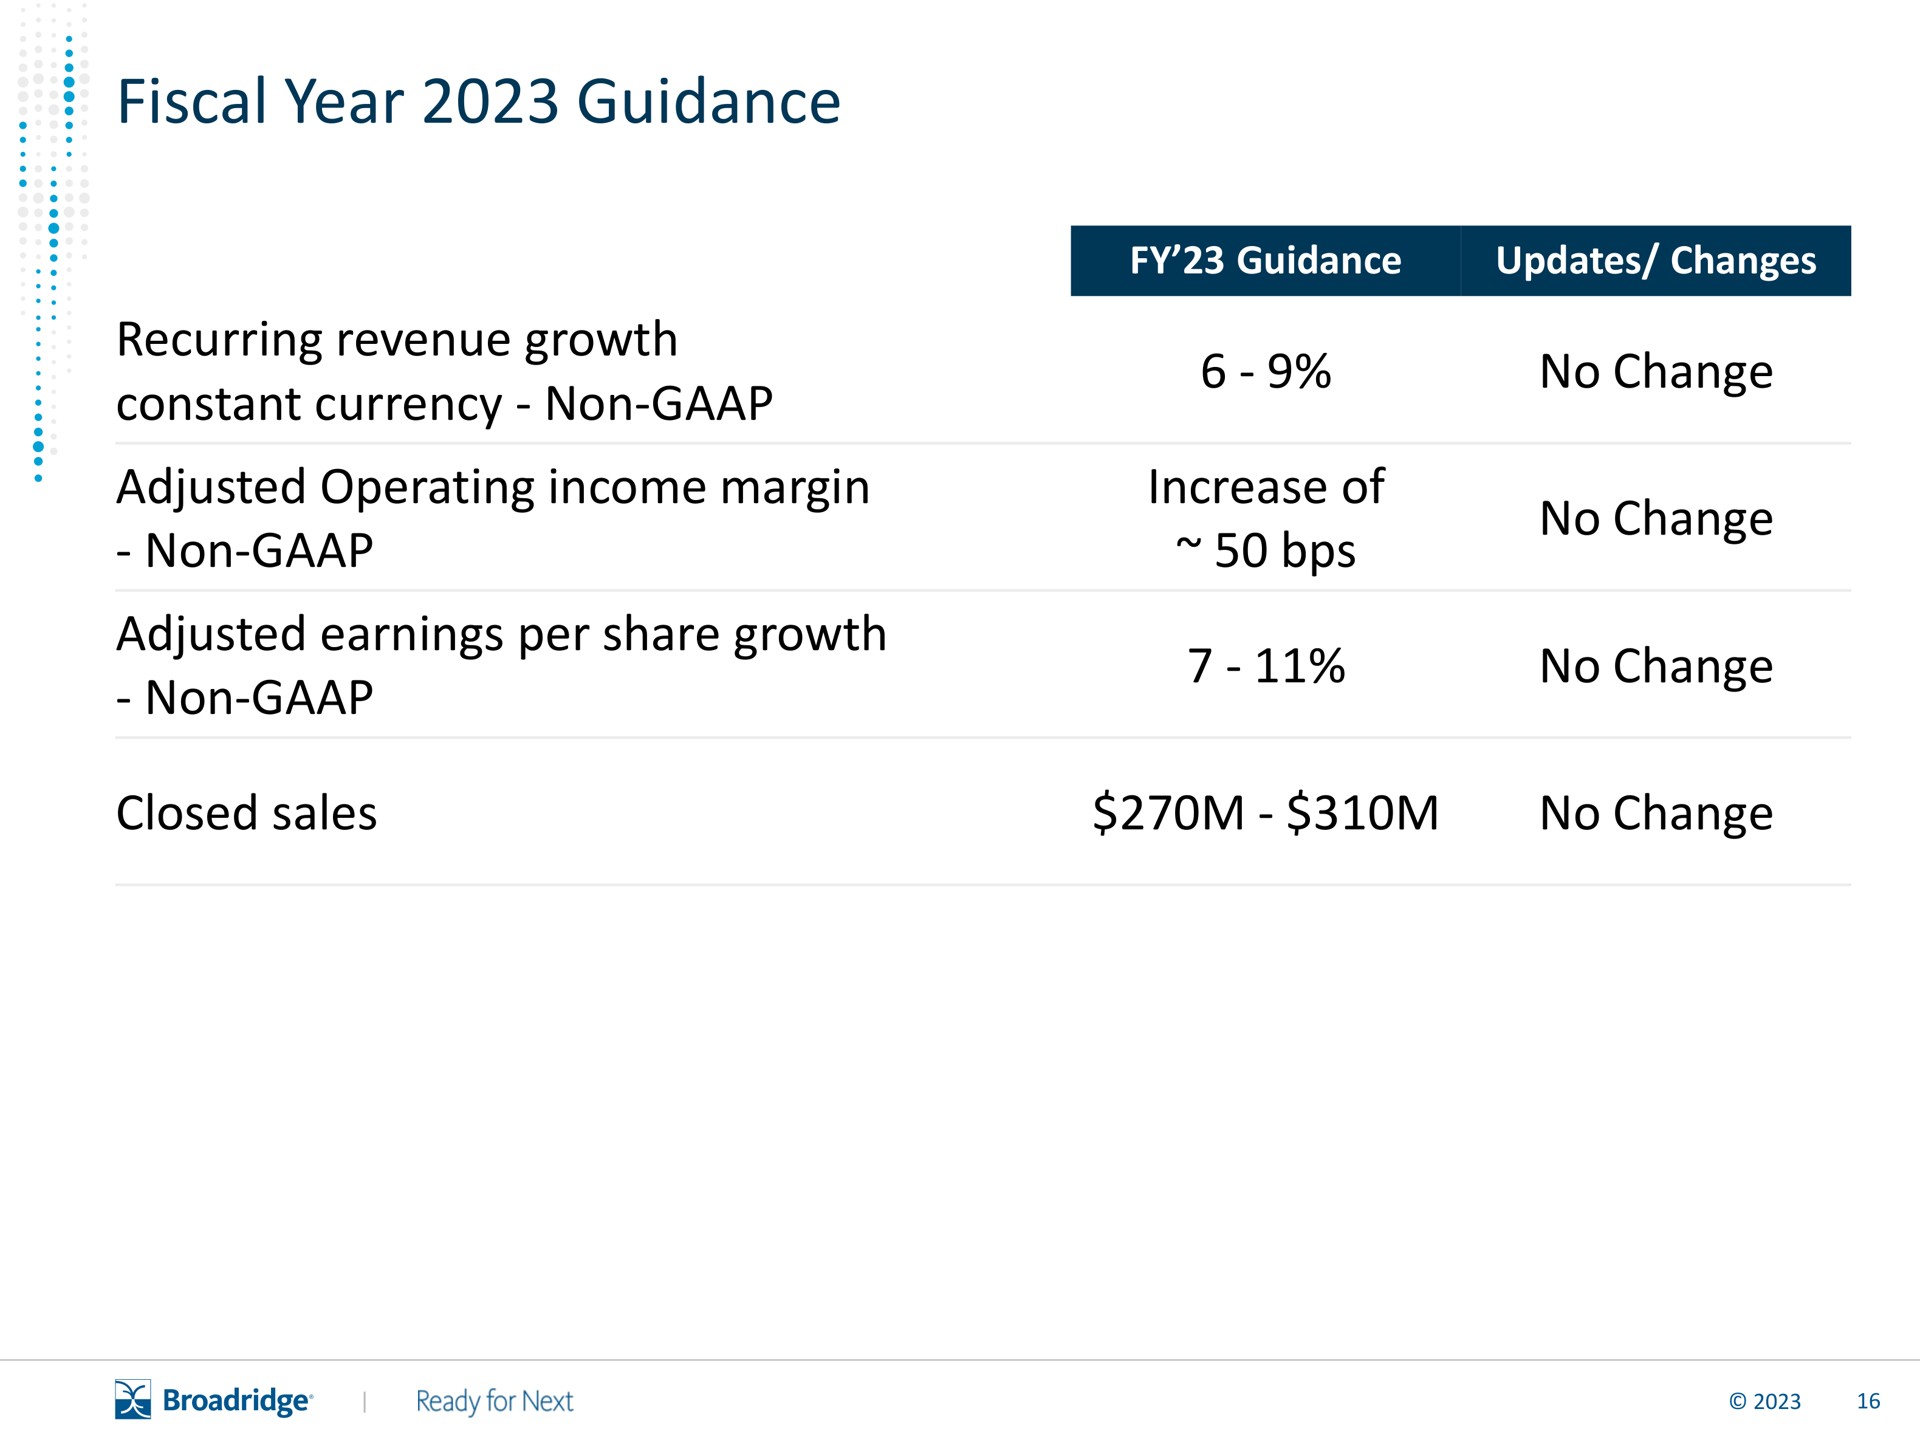 fiscal year guidance recurring revenue growth constant currency non adjusted operating income margin non adjusted earnings per share growth non no change increase of no change no change closed sales no change | Broadridge Financial Solutions